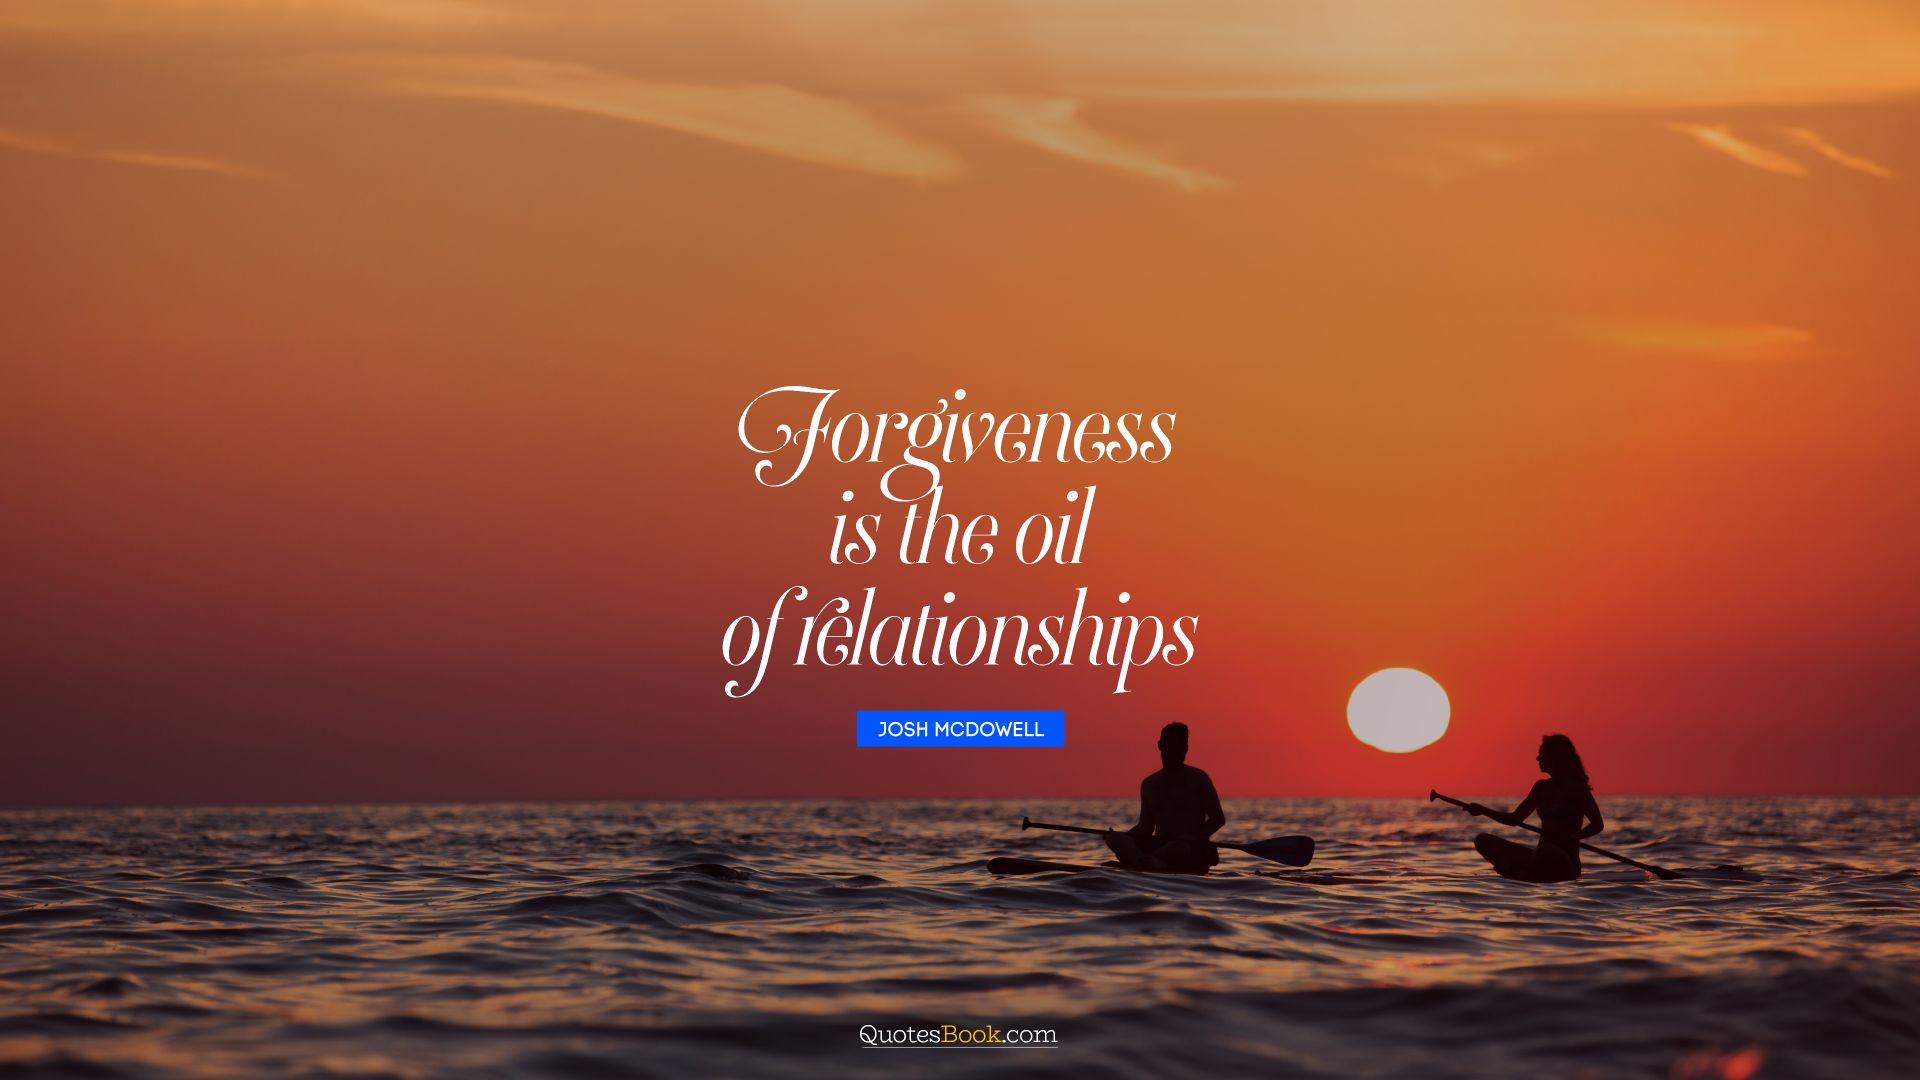 Forgiveness is the oil of relationships. - Quote by Josh McDowell